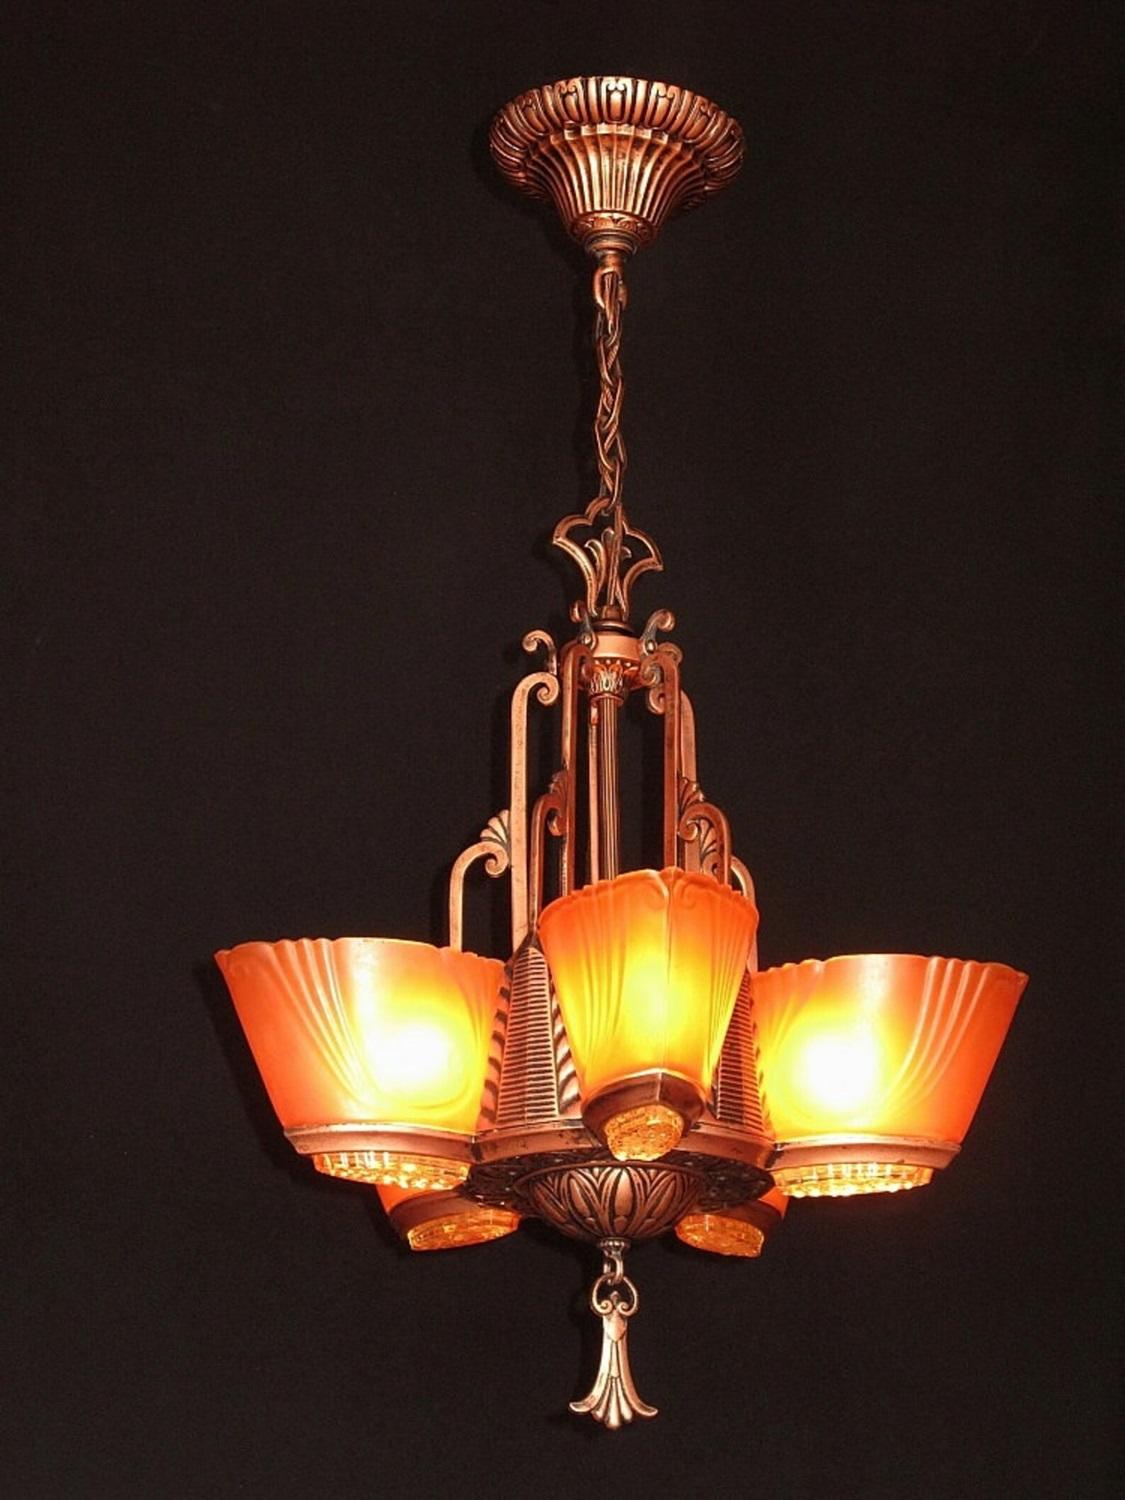 Another example of why Virden was one of the very few lighting manufacturers from the depression era (1930s, not 2008) to still be in business in the 21st Century. Although this wonderful antique slip shade chandelier was born during the Art Deco